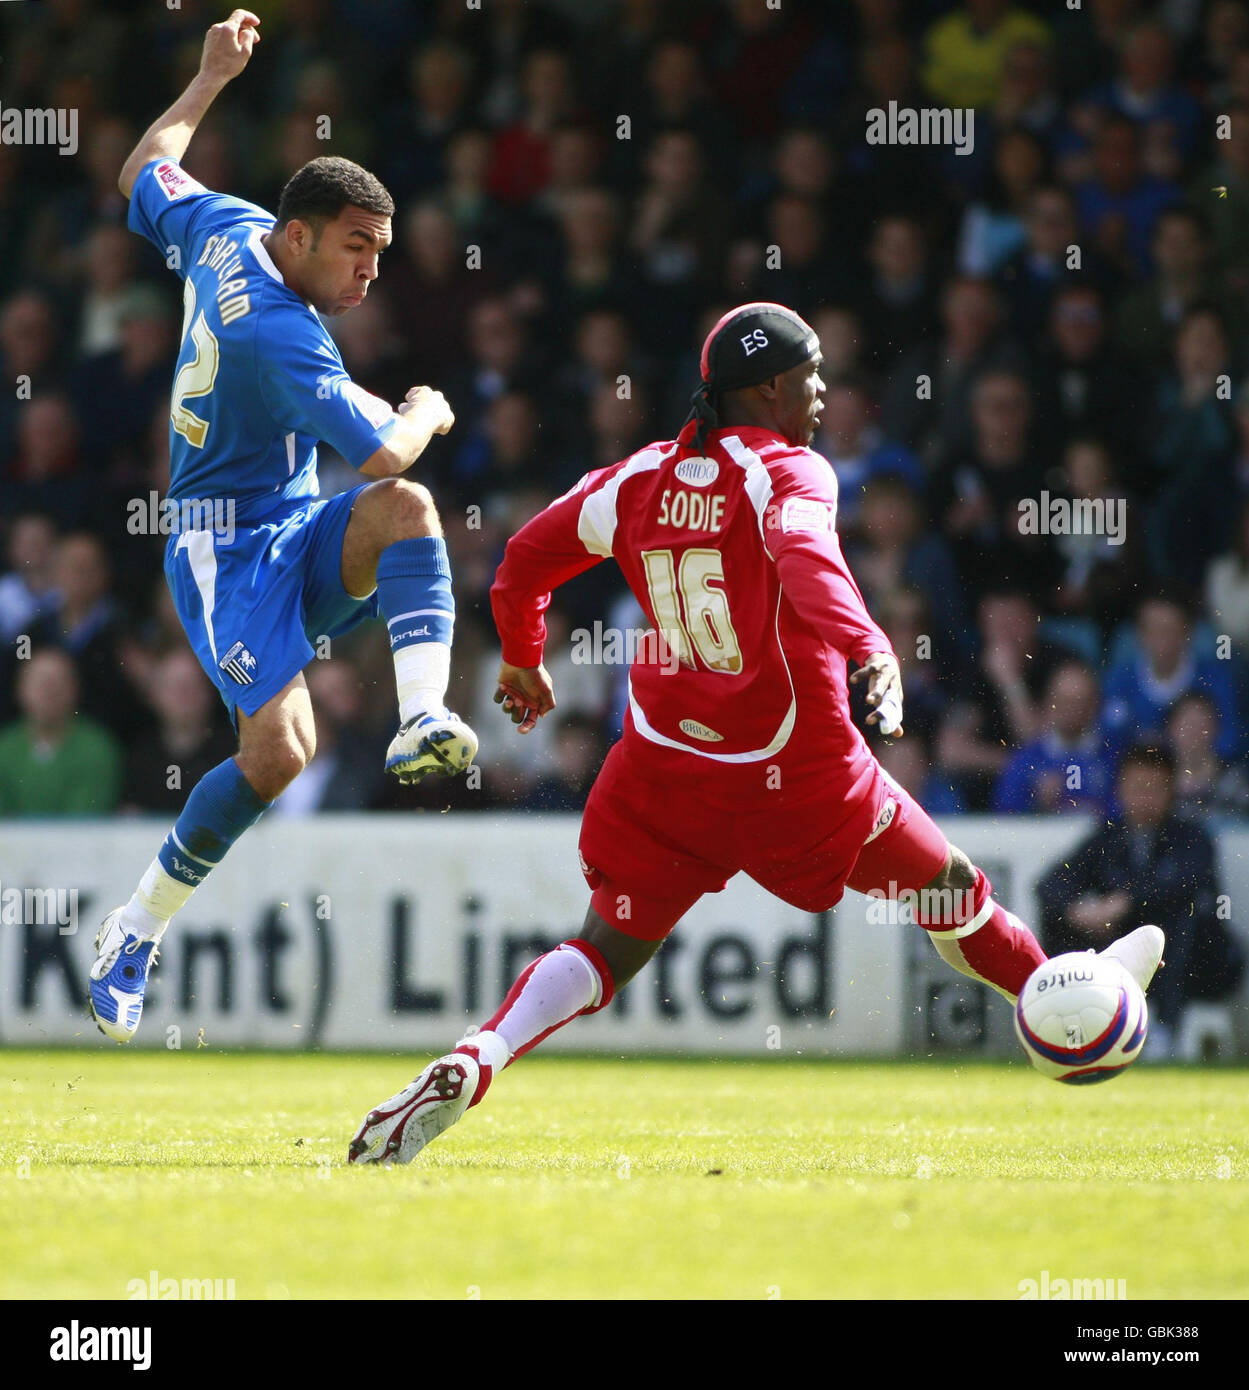 Gillingham's Andrew Barcham (right) with Bury's Efetobore Sodje (left) battle for the ball during the Coca-Cola League One match at the KRBS Priestfield Stadium, Gillingham. Stock Photo